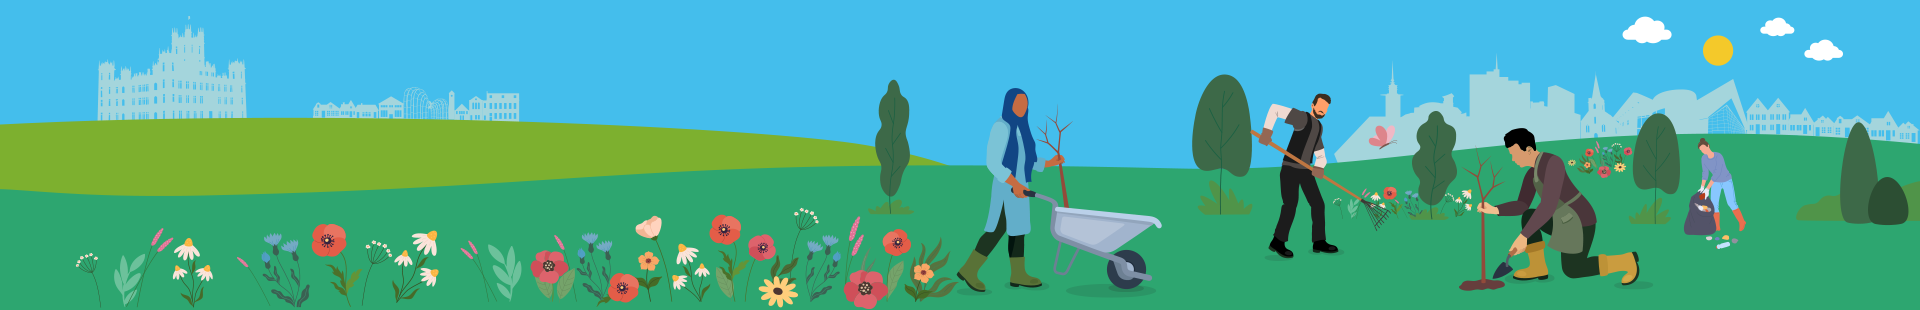 A person using a wheelbarrow, a person using a rake, a person planting a tree and a person collecting rubbish on a green background including flowers, trees and butterflies against a backdrop with Basingstoke and Deane landmarks